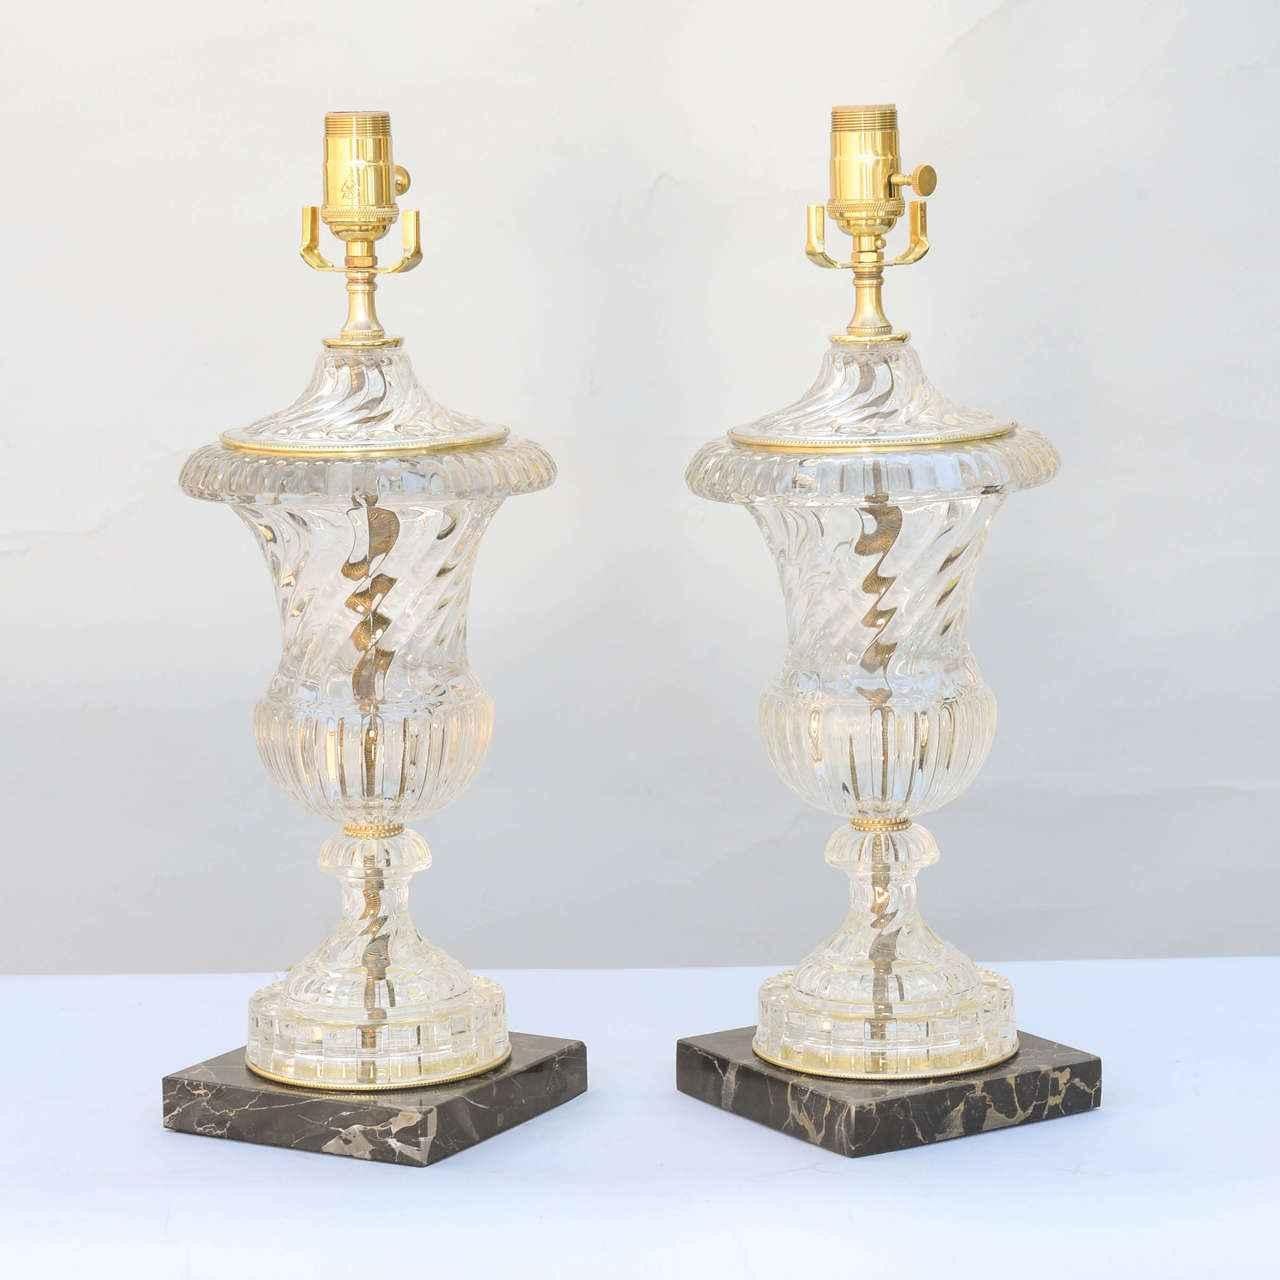 Pair of Spiral Urn Baccarat Glass Lamps 1